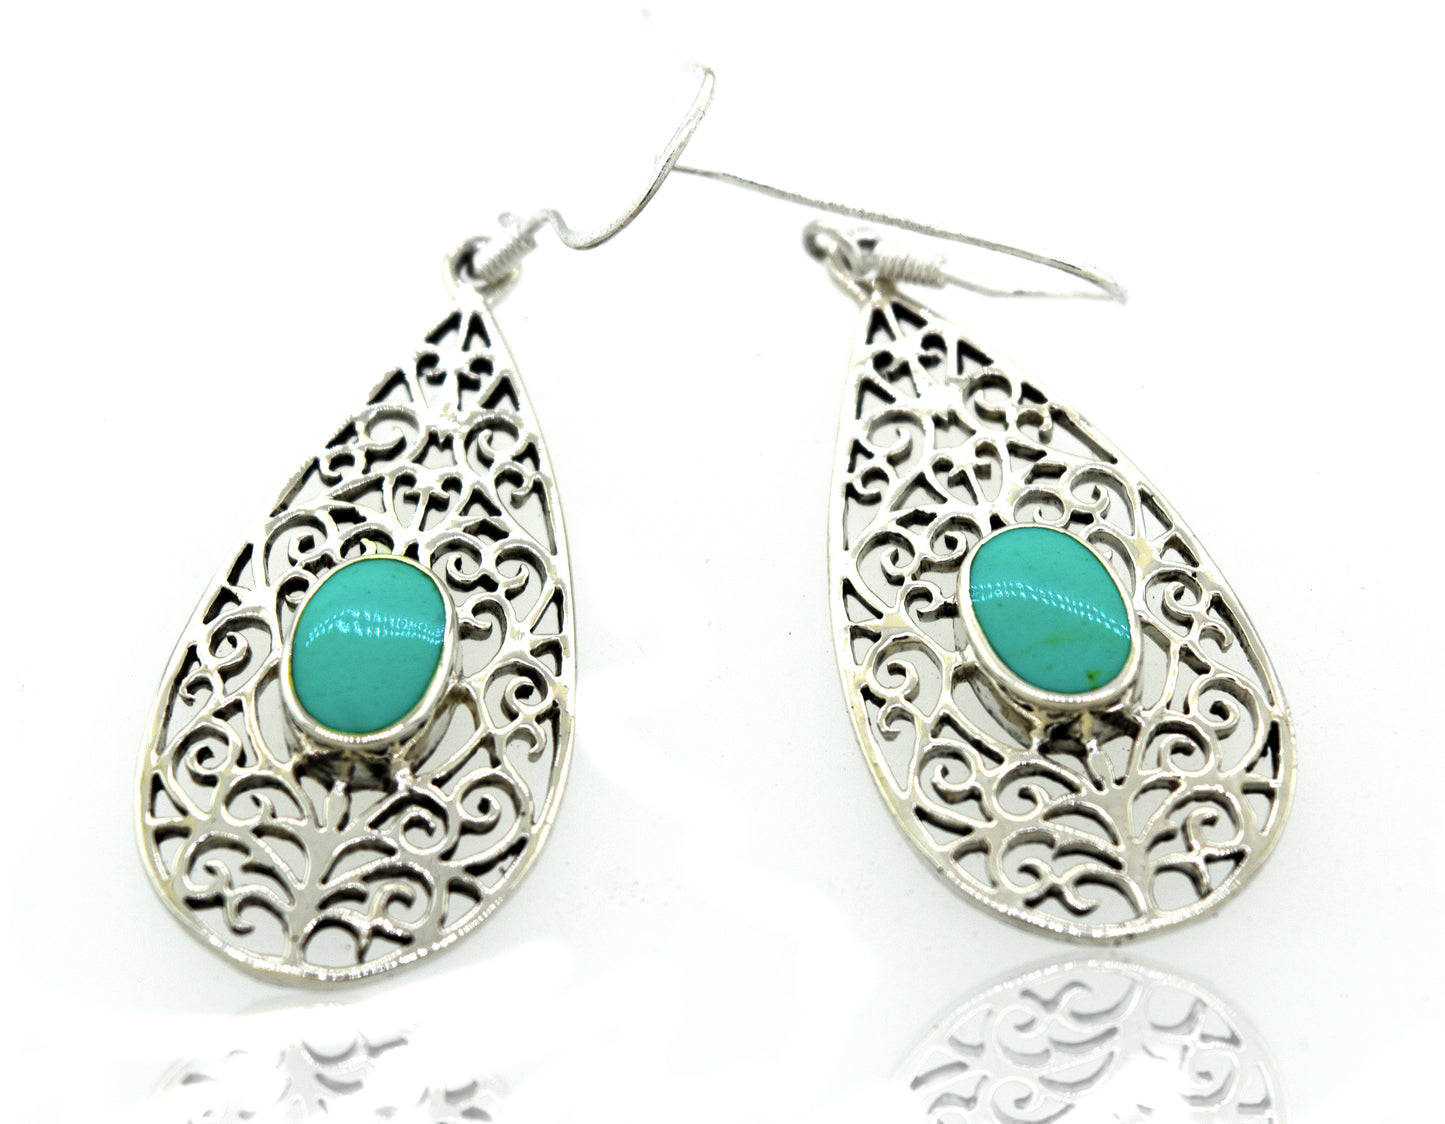 Super Silver presents the Elegant Teardrop Shape Turquoise Earrings featuring a teardrop-shaped turquoise stone and filigree design.